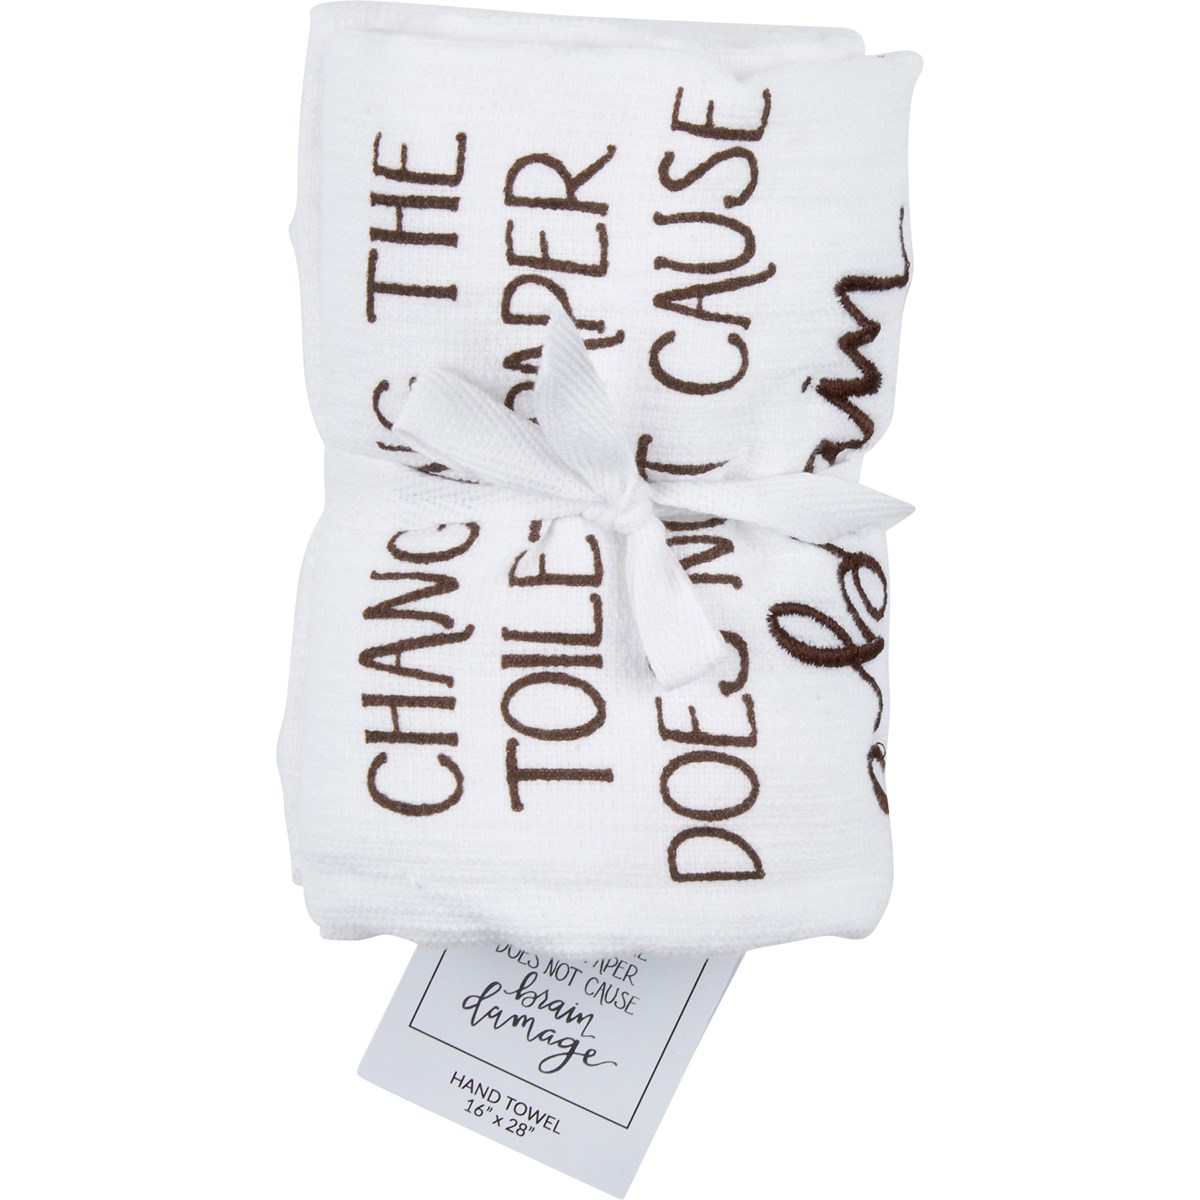 Does Not Cause Brain Damage Hand Towel - Cotton, Terrycloth